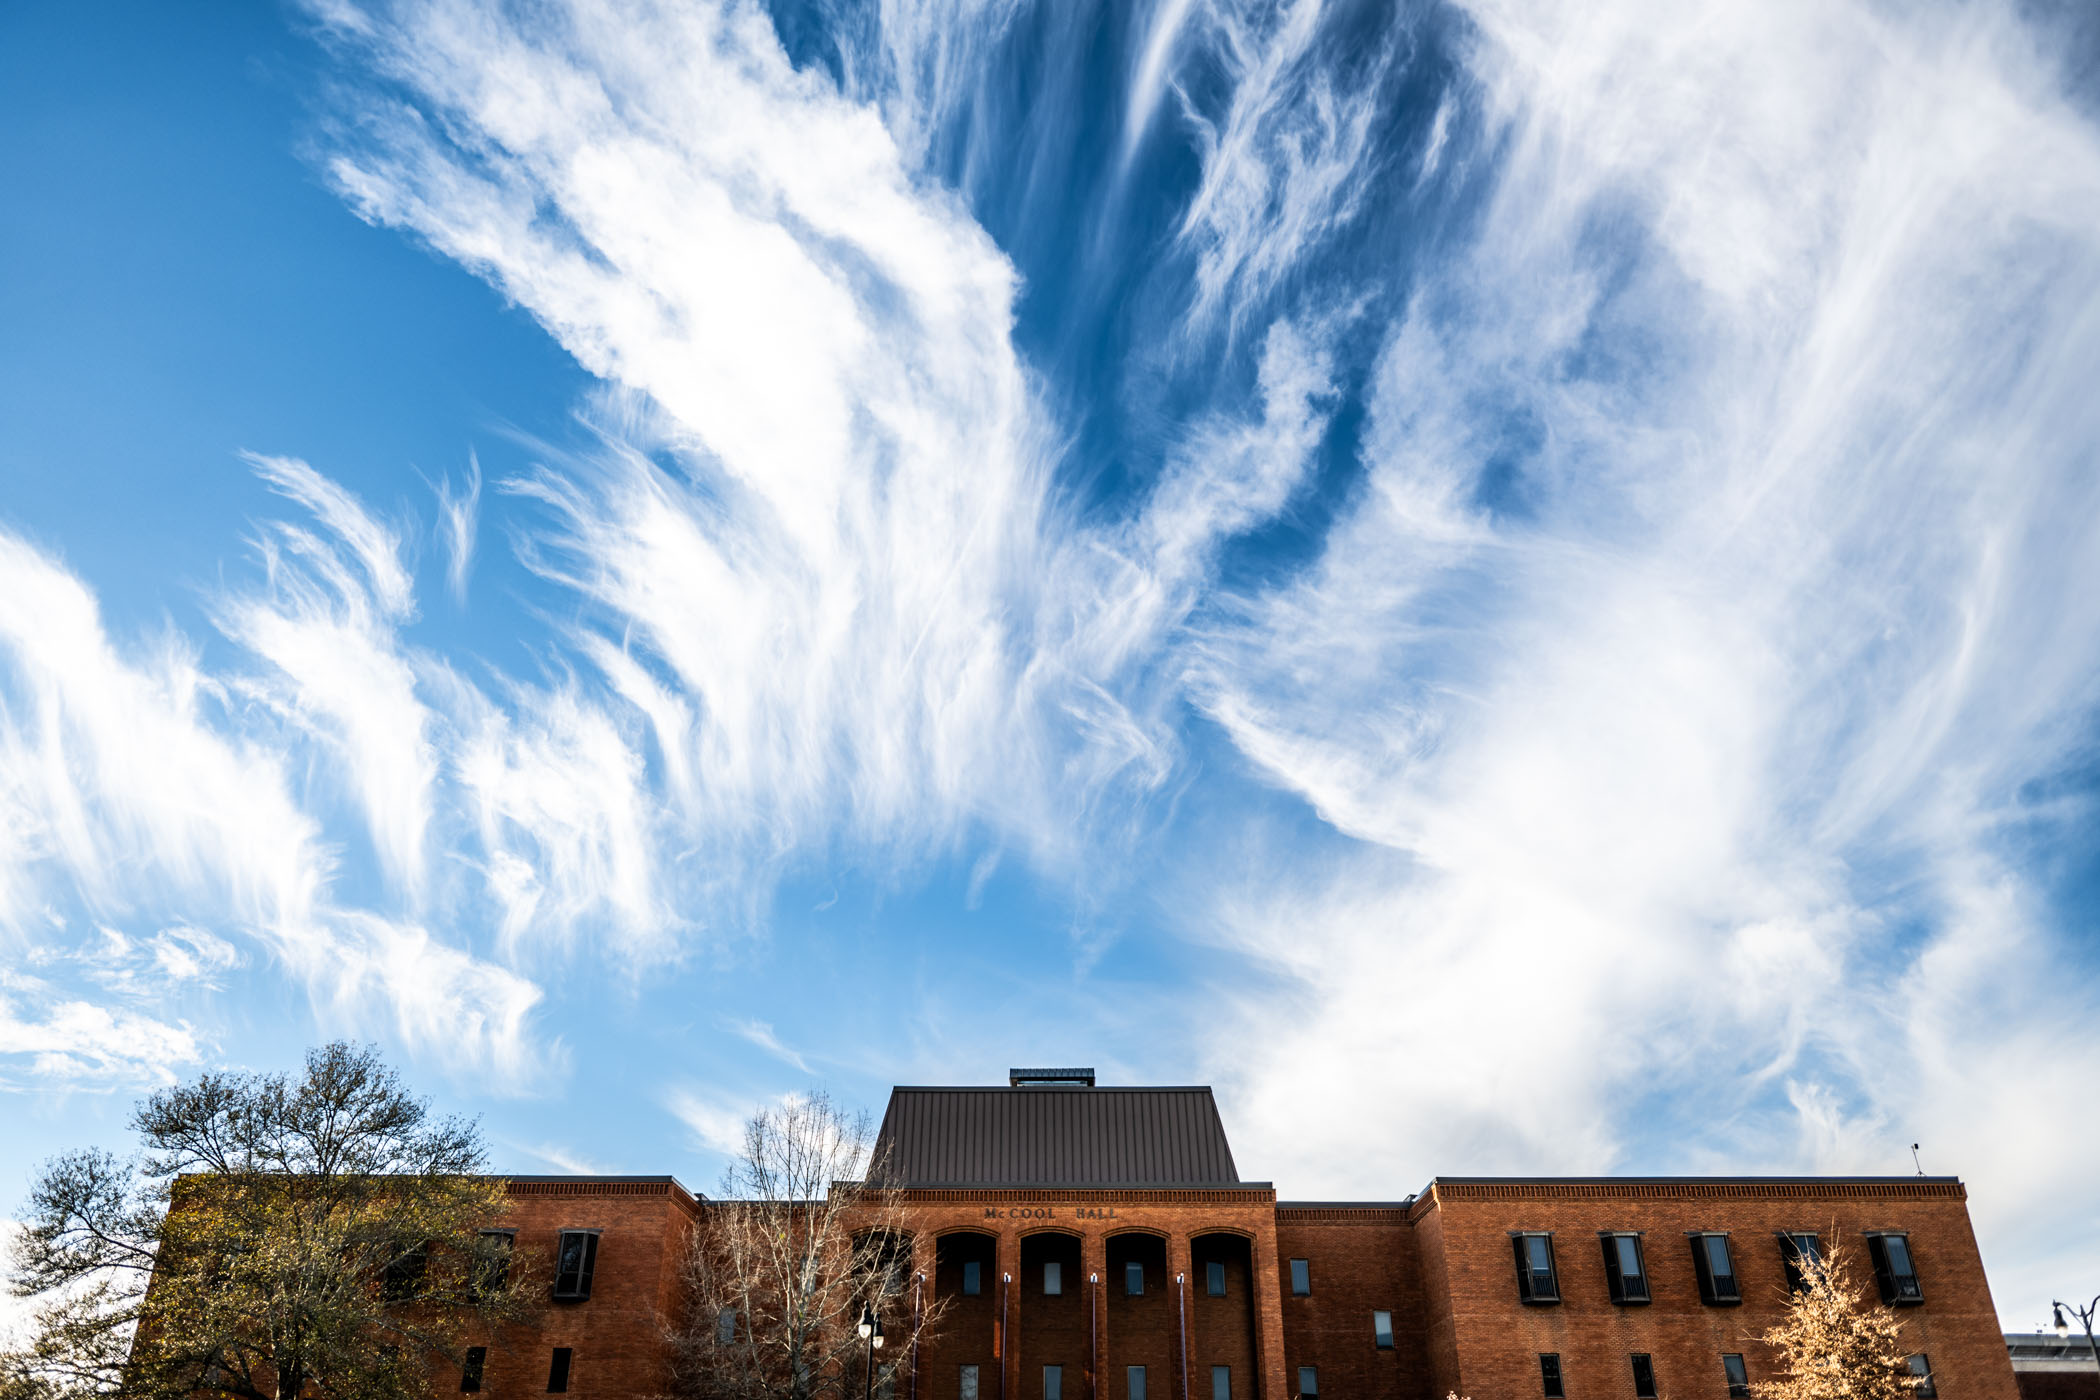 Wispy Cirrus clouds crown the sky above McCool Hall on a bright winter afternoon